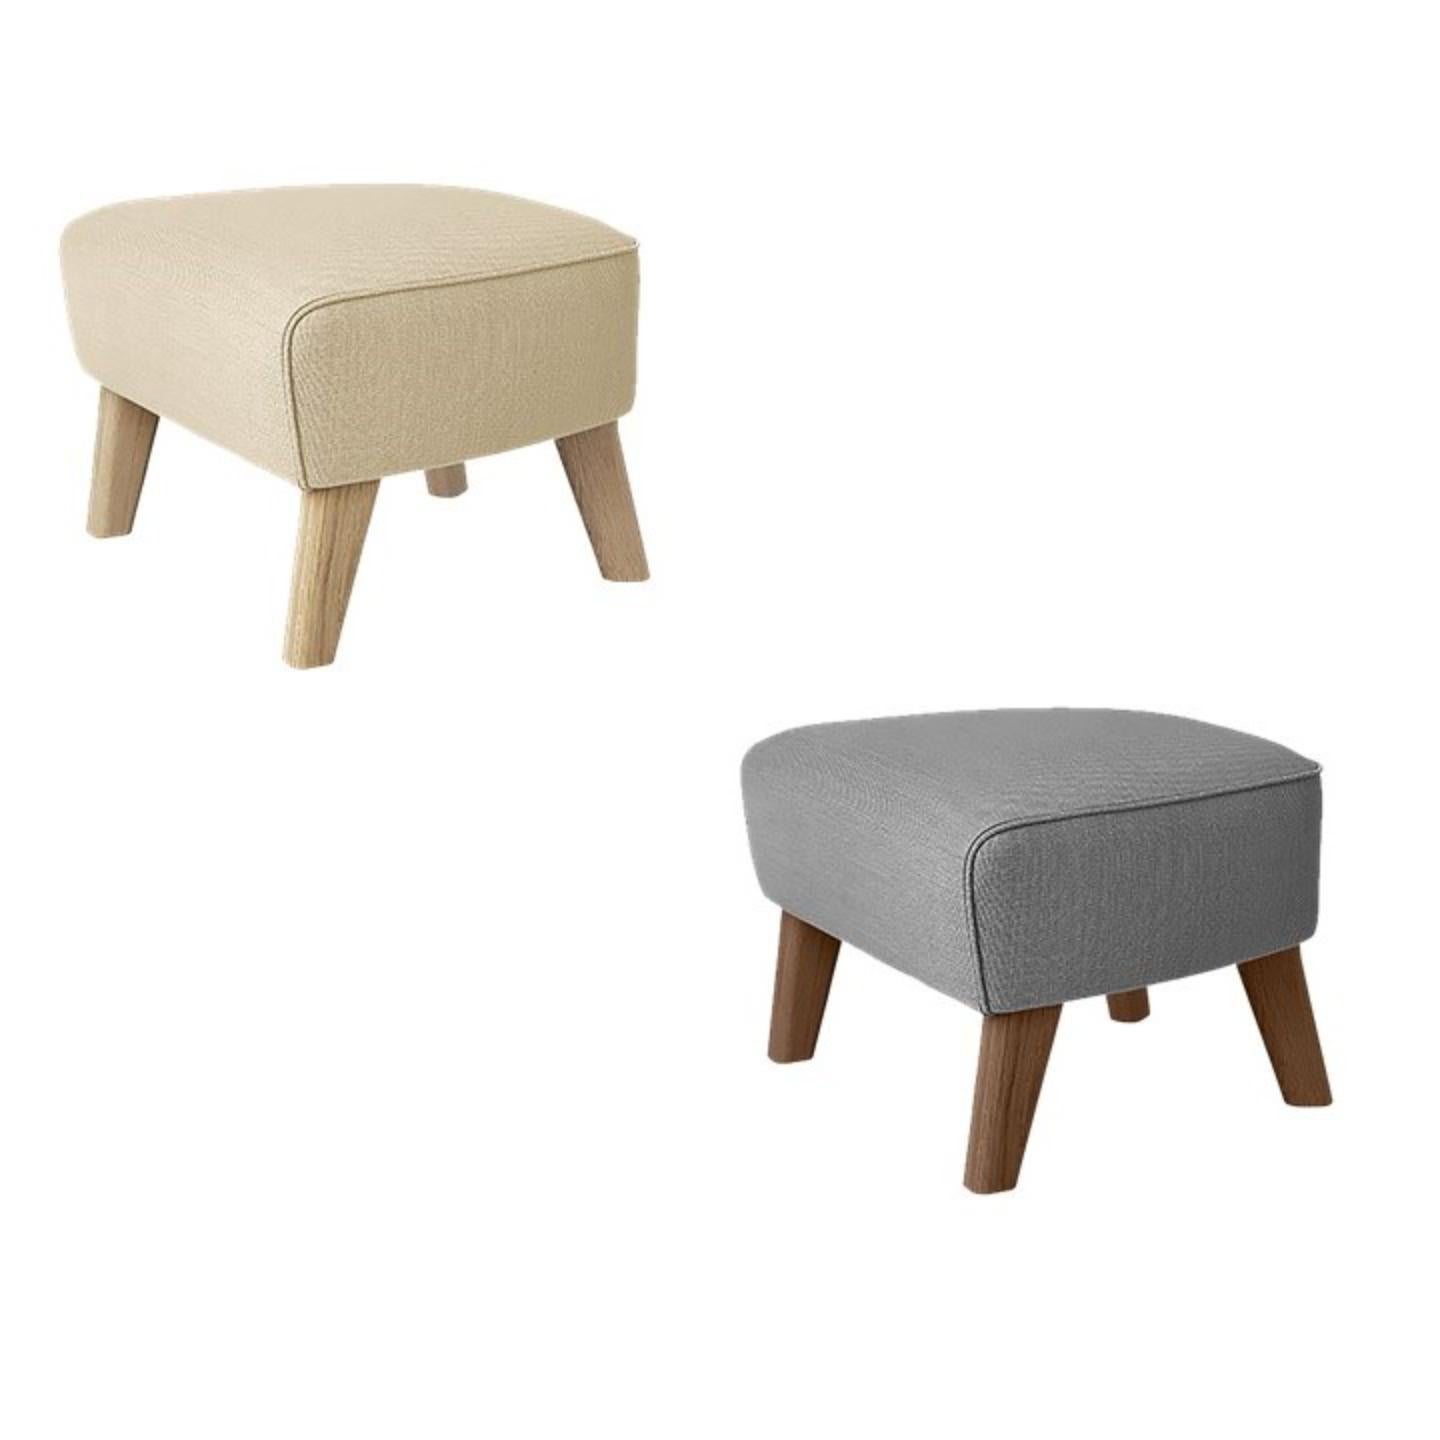 Other Set of 4 Beige and Natural Oak Sahco Zero Footstool by Lassen For Sale